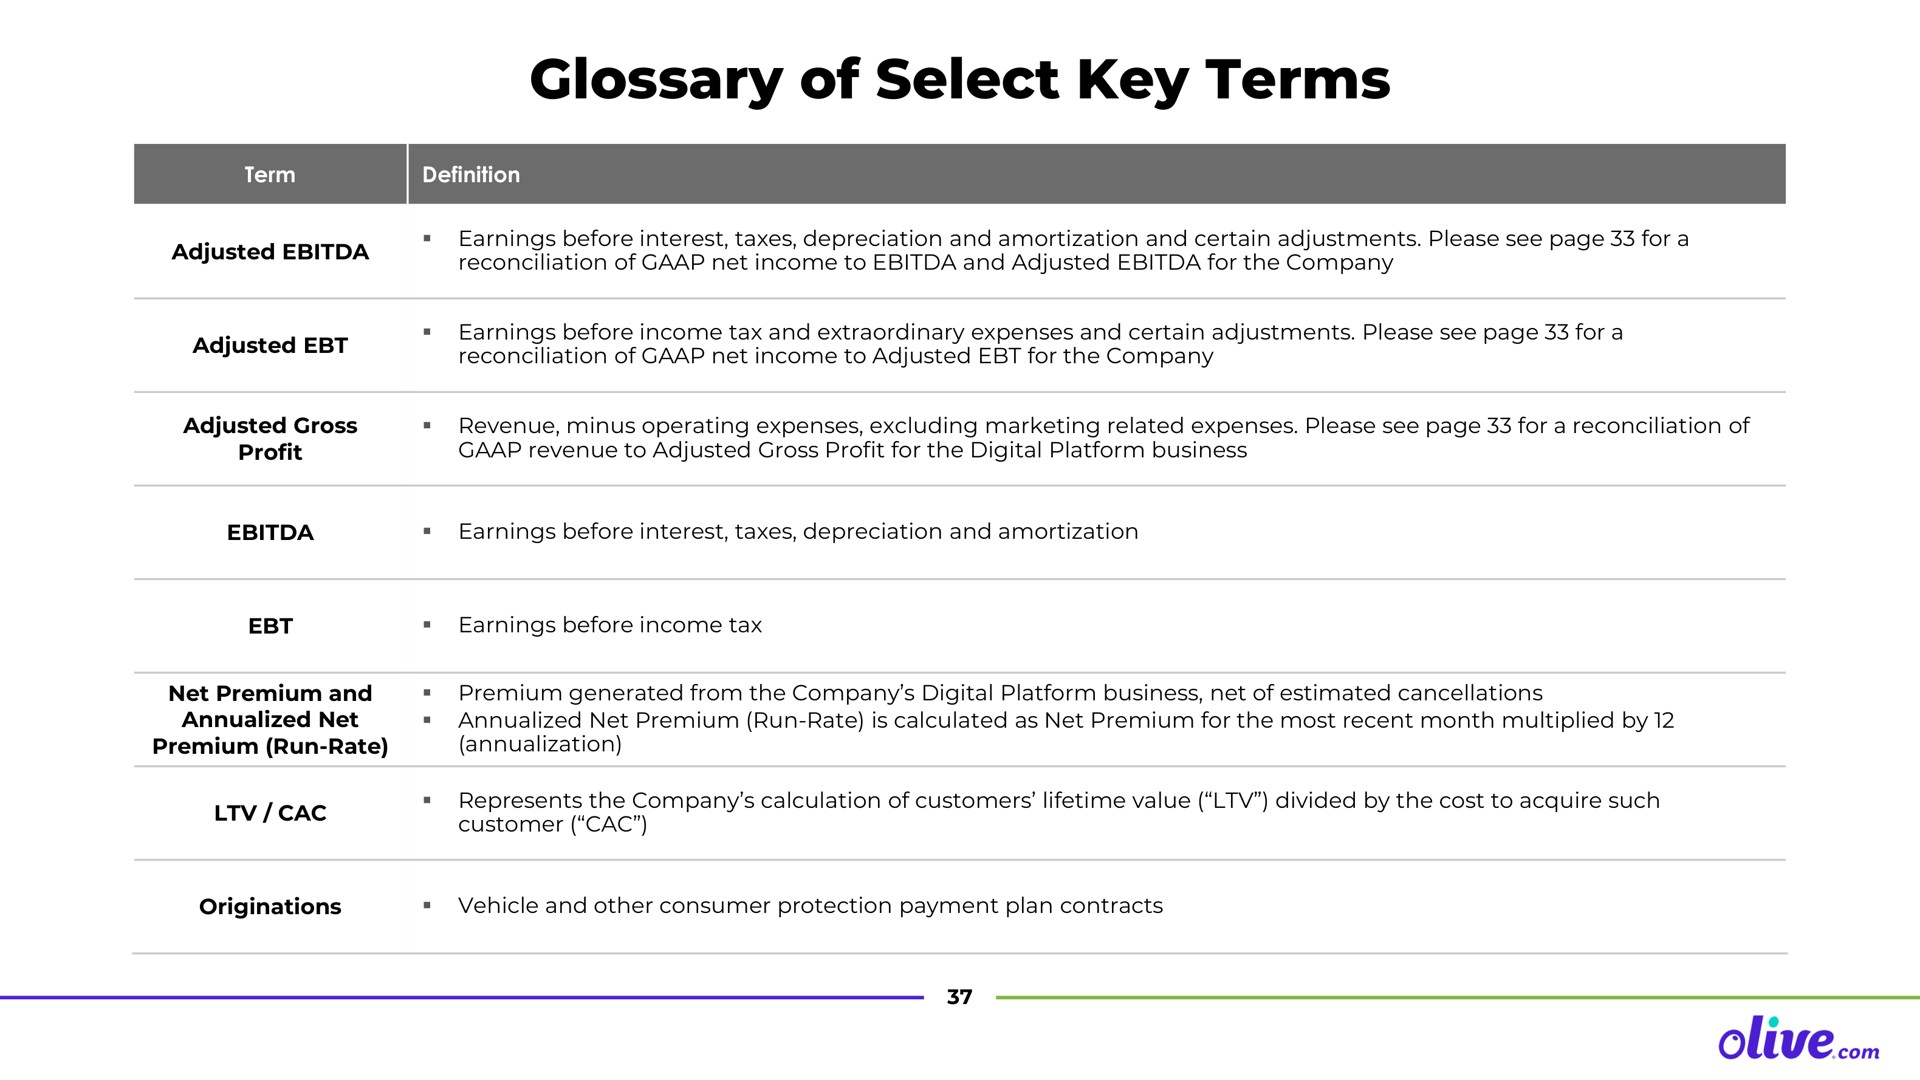 glossary of select key terms olive con | Olive.com